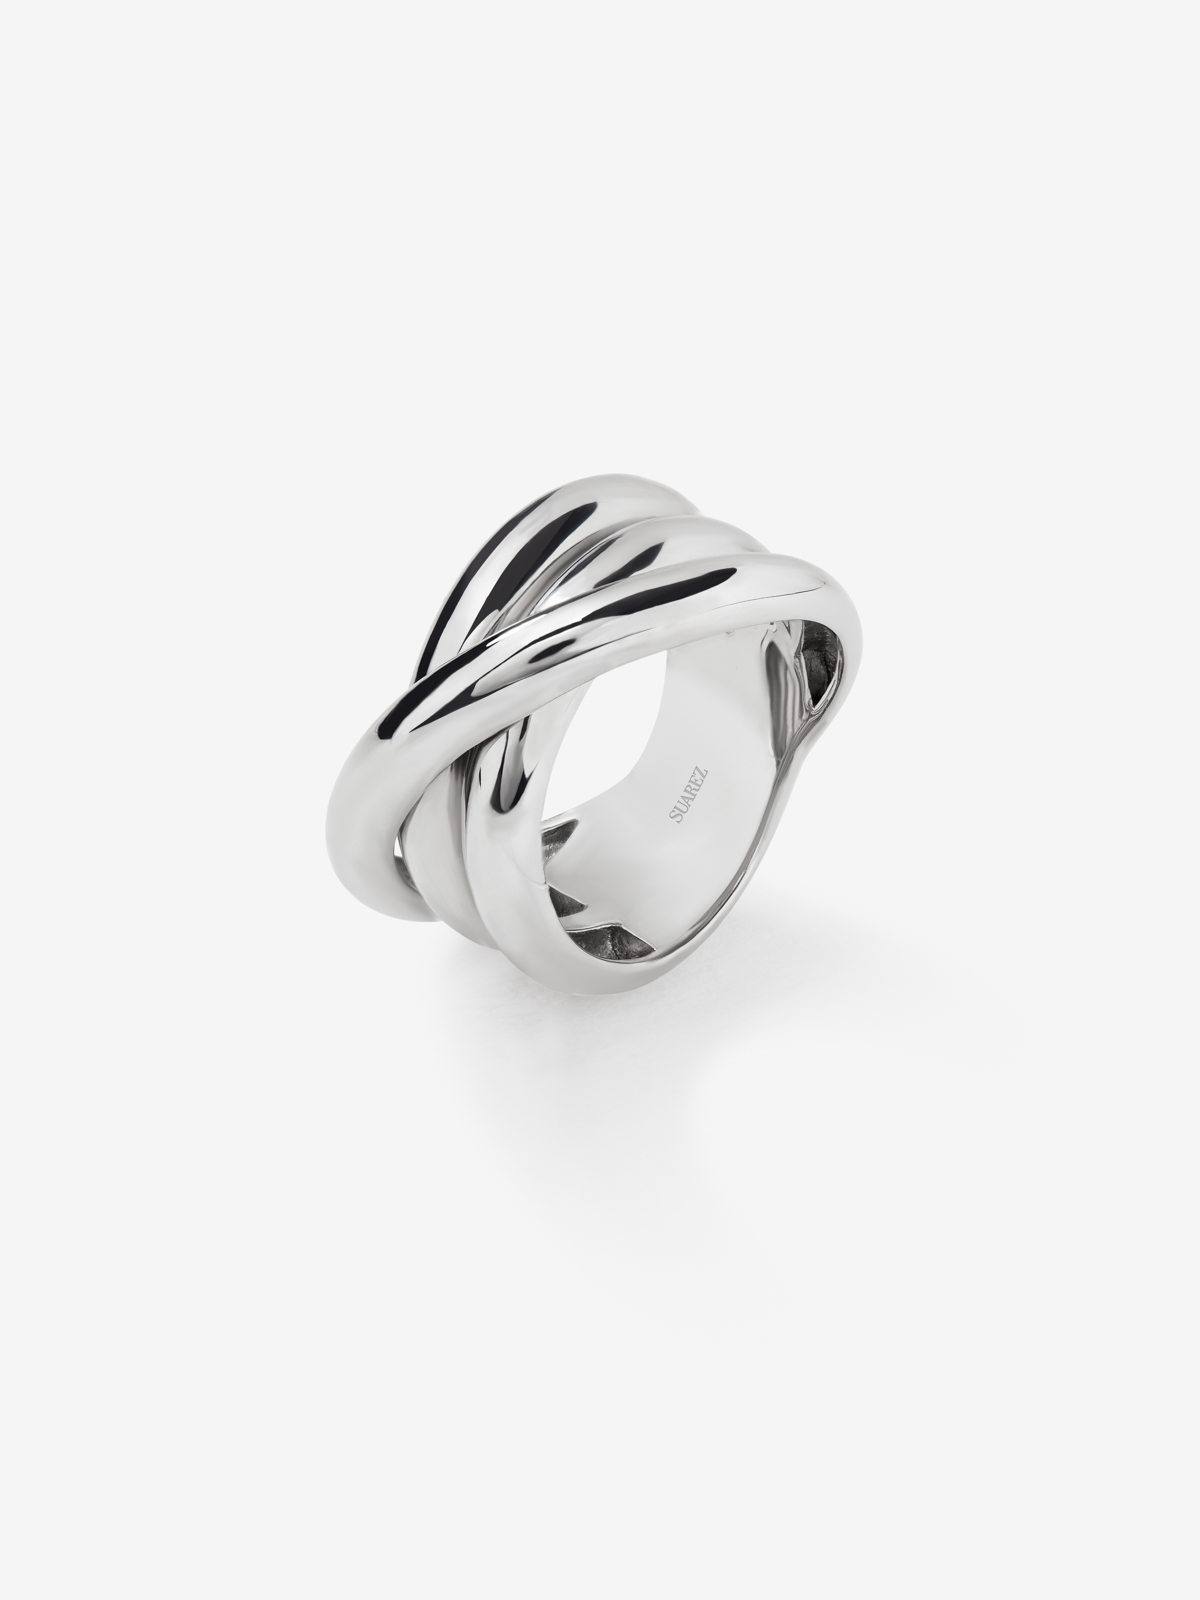 Triple-arm wide plain ring made from 925 silver